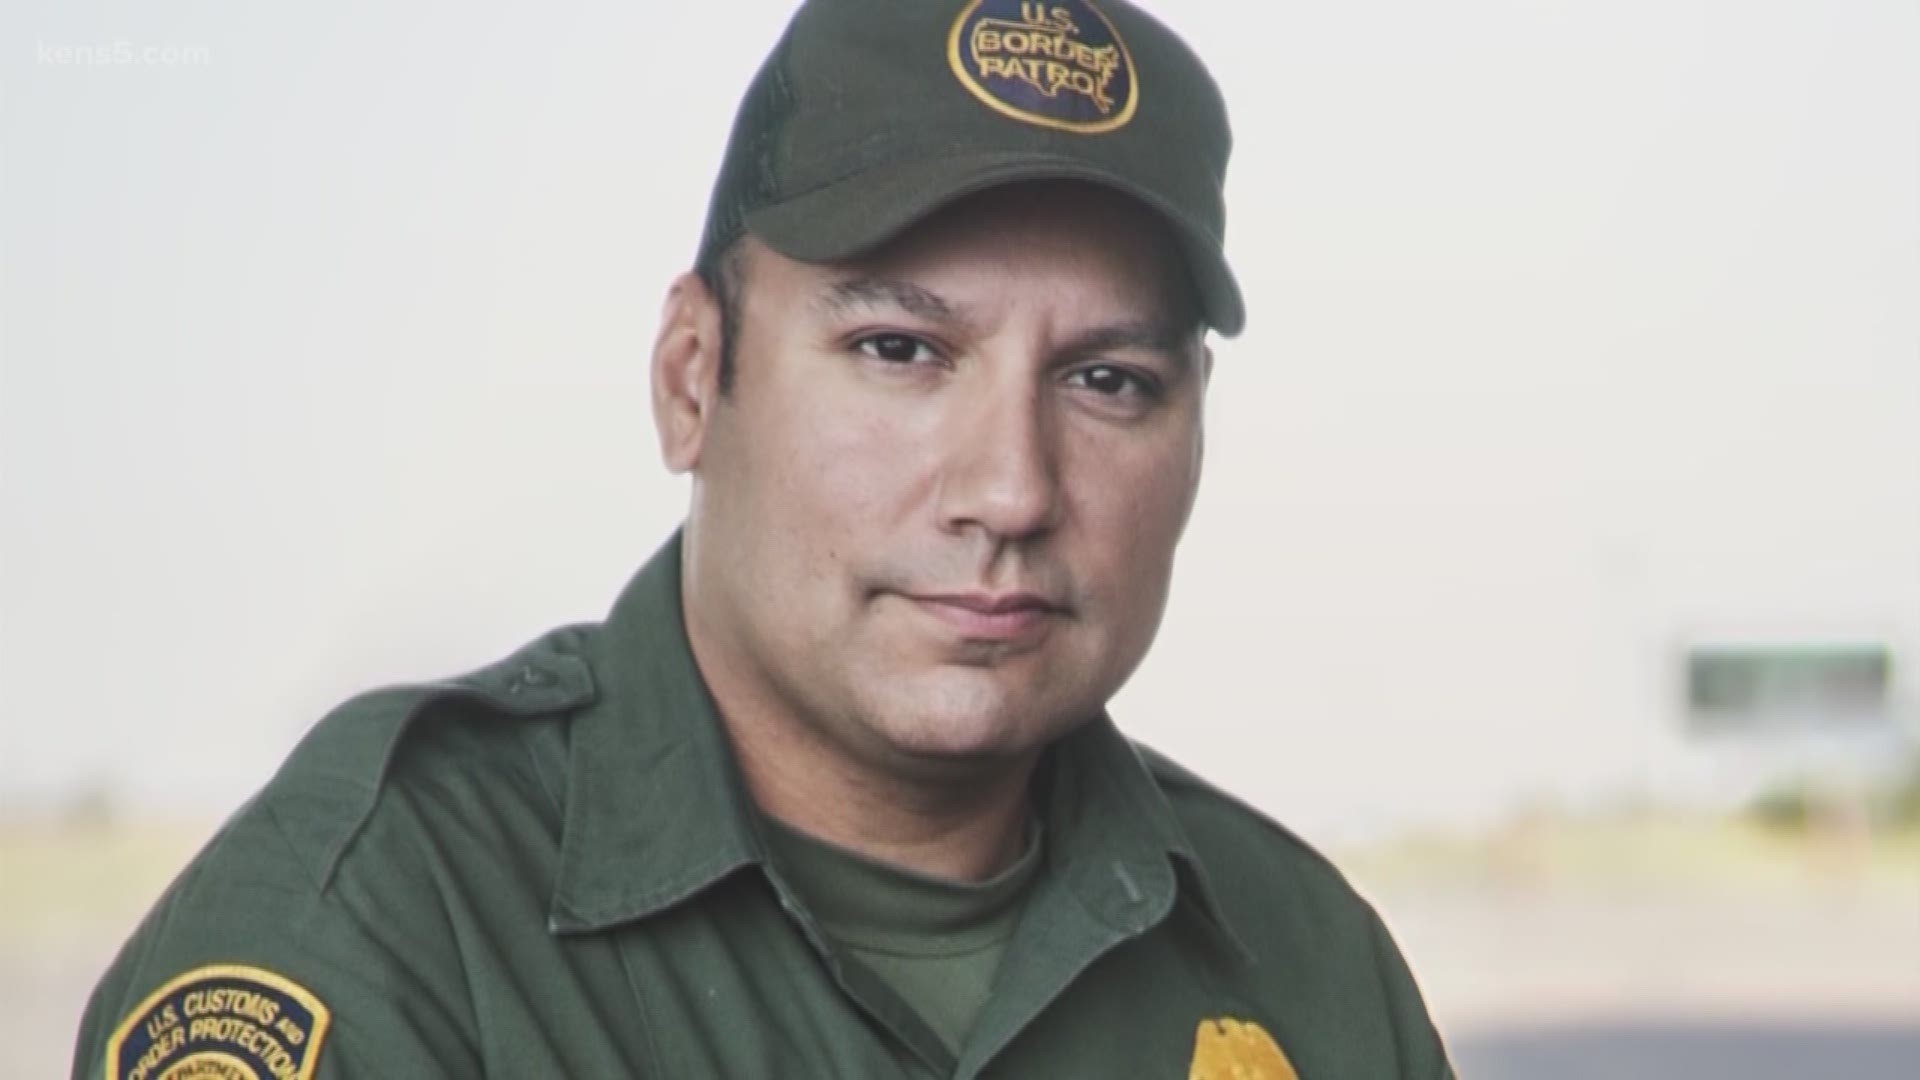 The Mexican national who killed an off-duty border patrol agent is sentenced to death. Eyewitness News border reporter Oscar Margain has more.